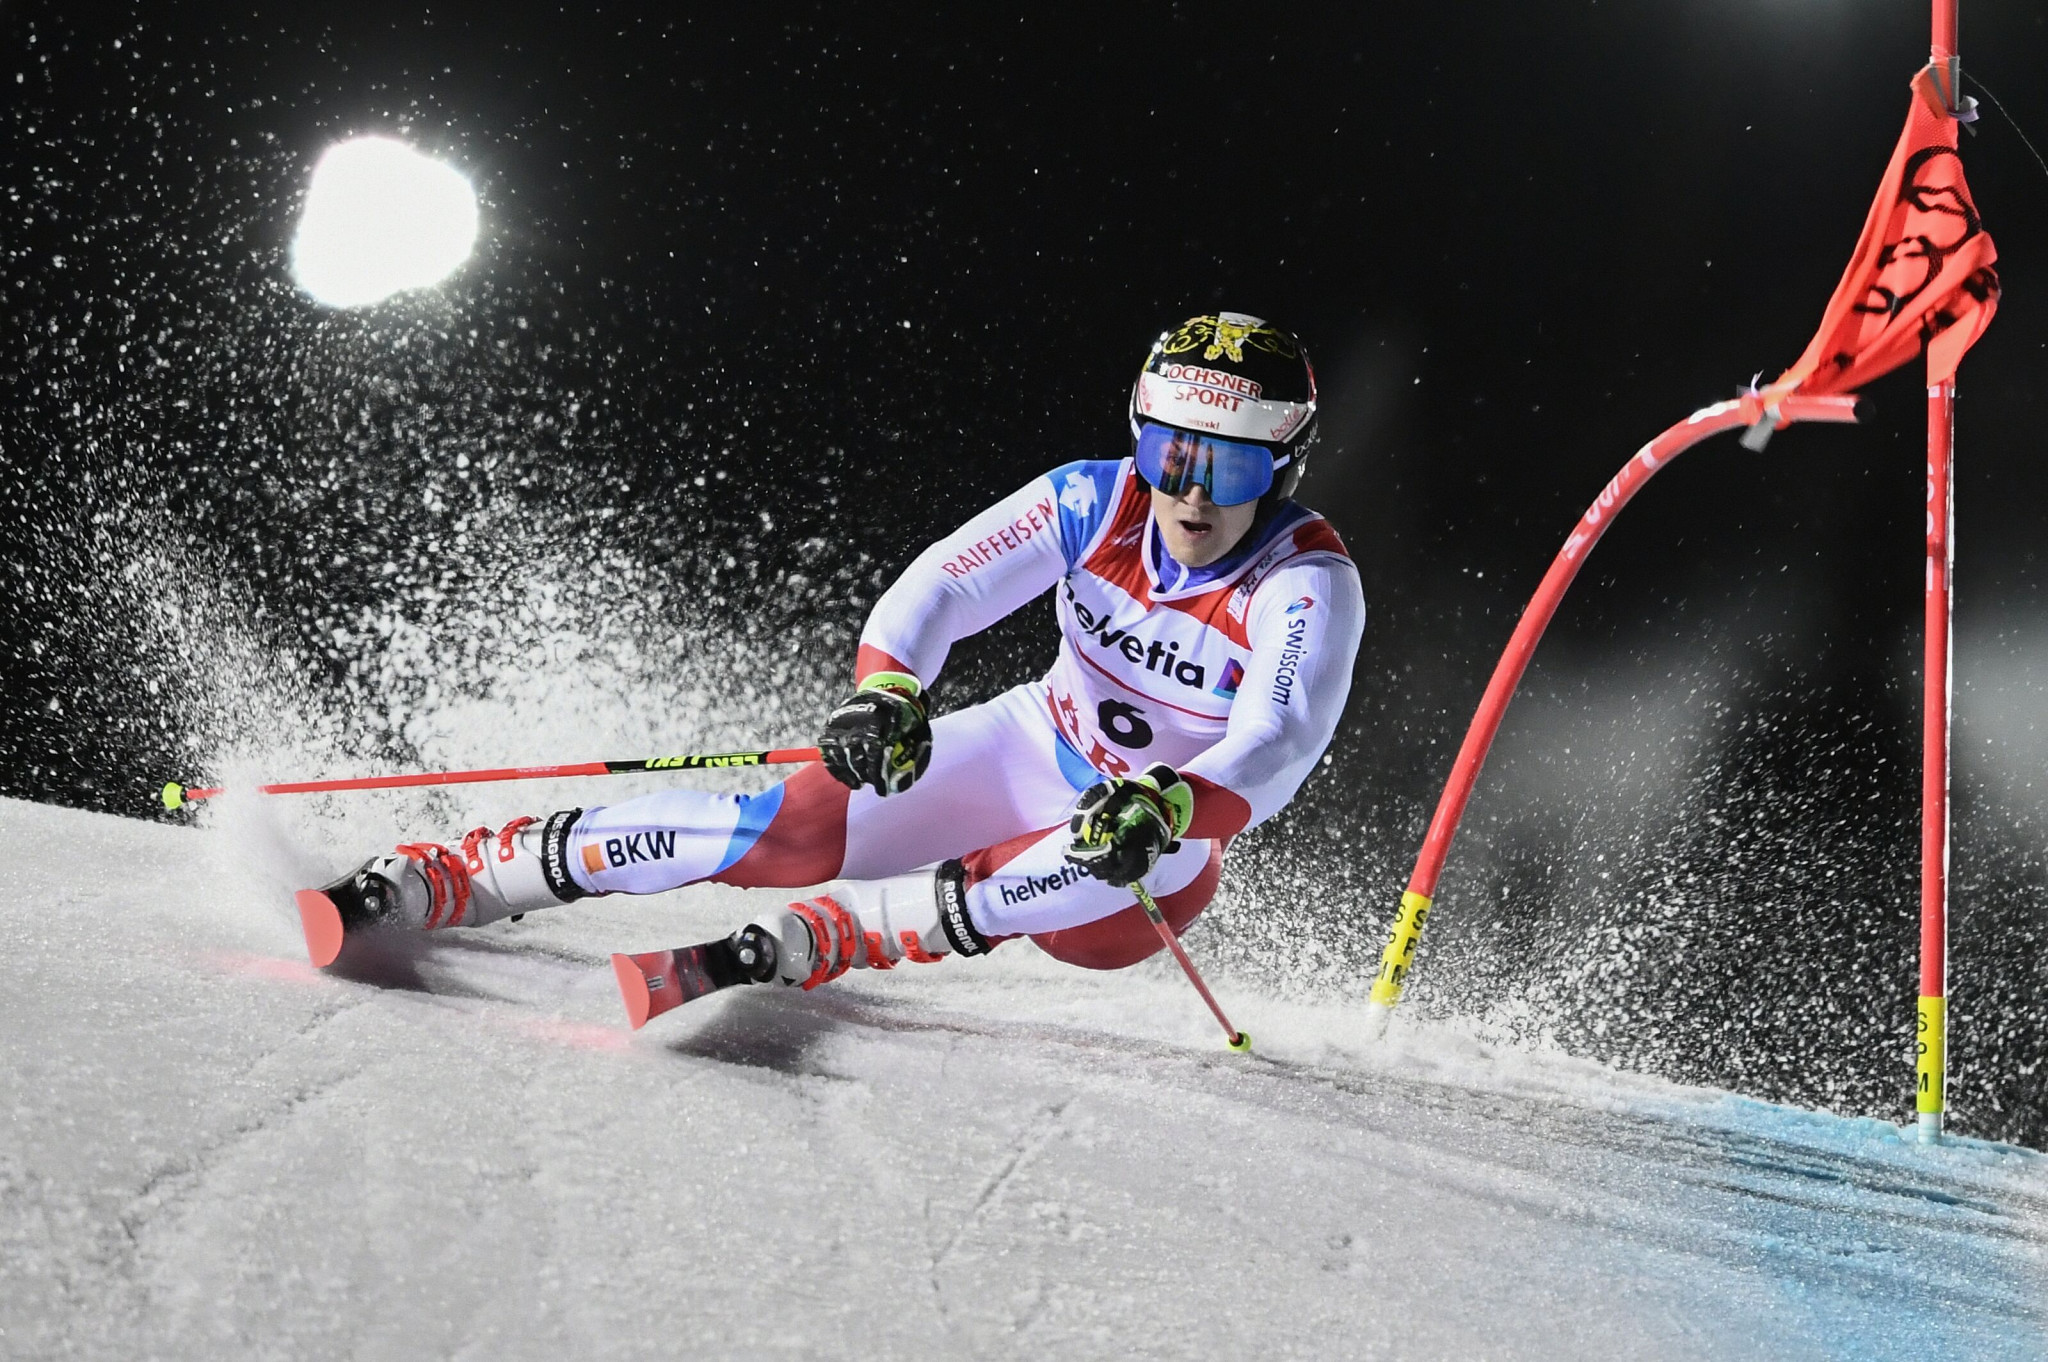 Switzerland's Loic Meillard narrowly missed out on a podium place after finishing fourth ©Getty Images